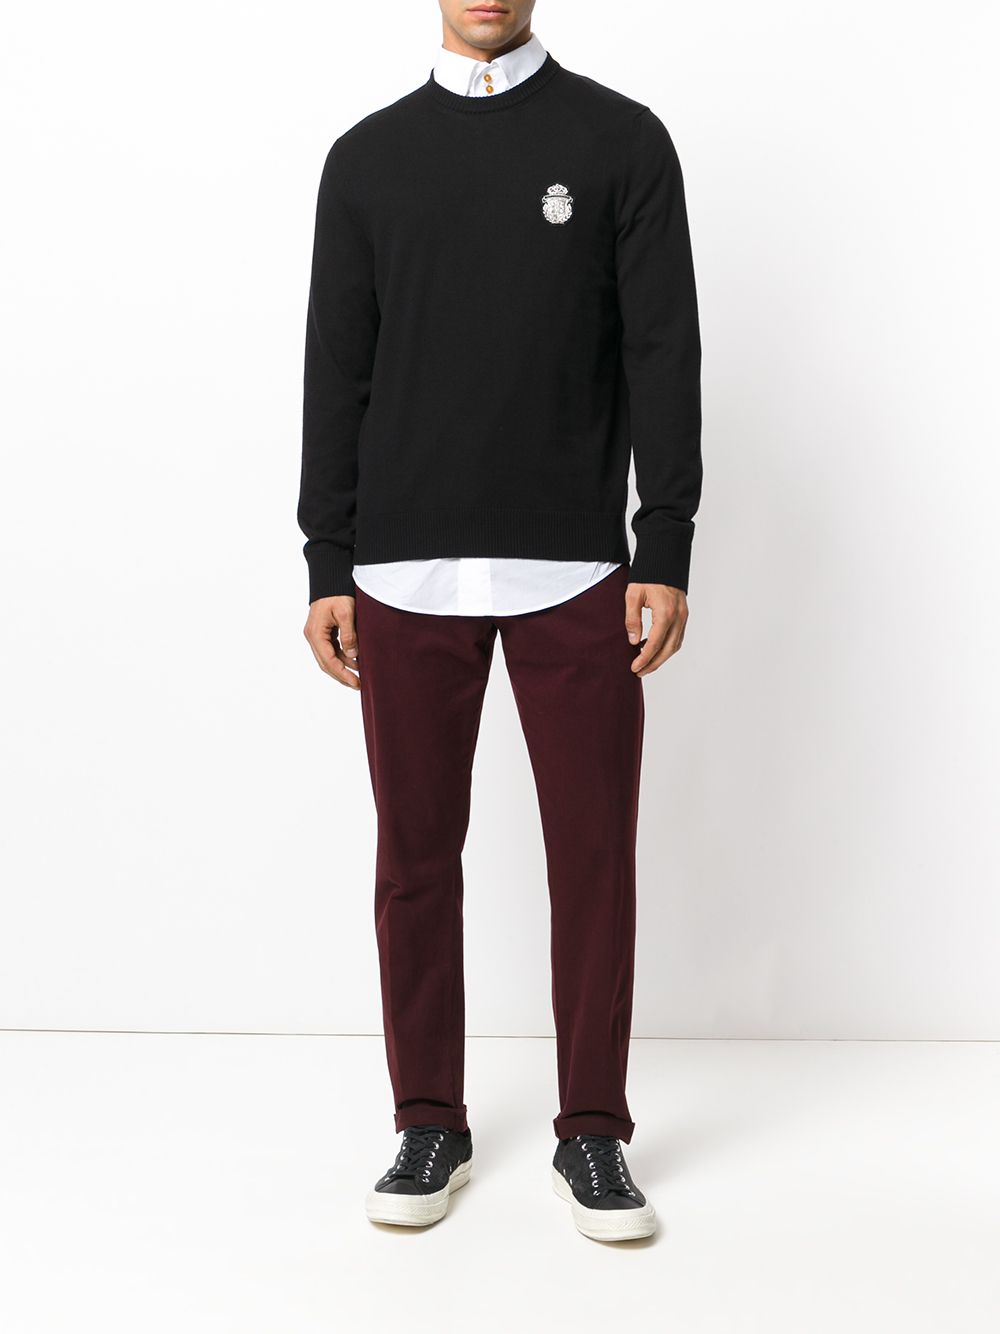 Shop Billionaire Out jumper with Express Delivery - FARFETCH